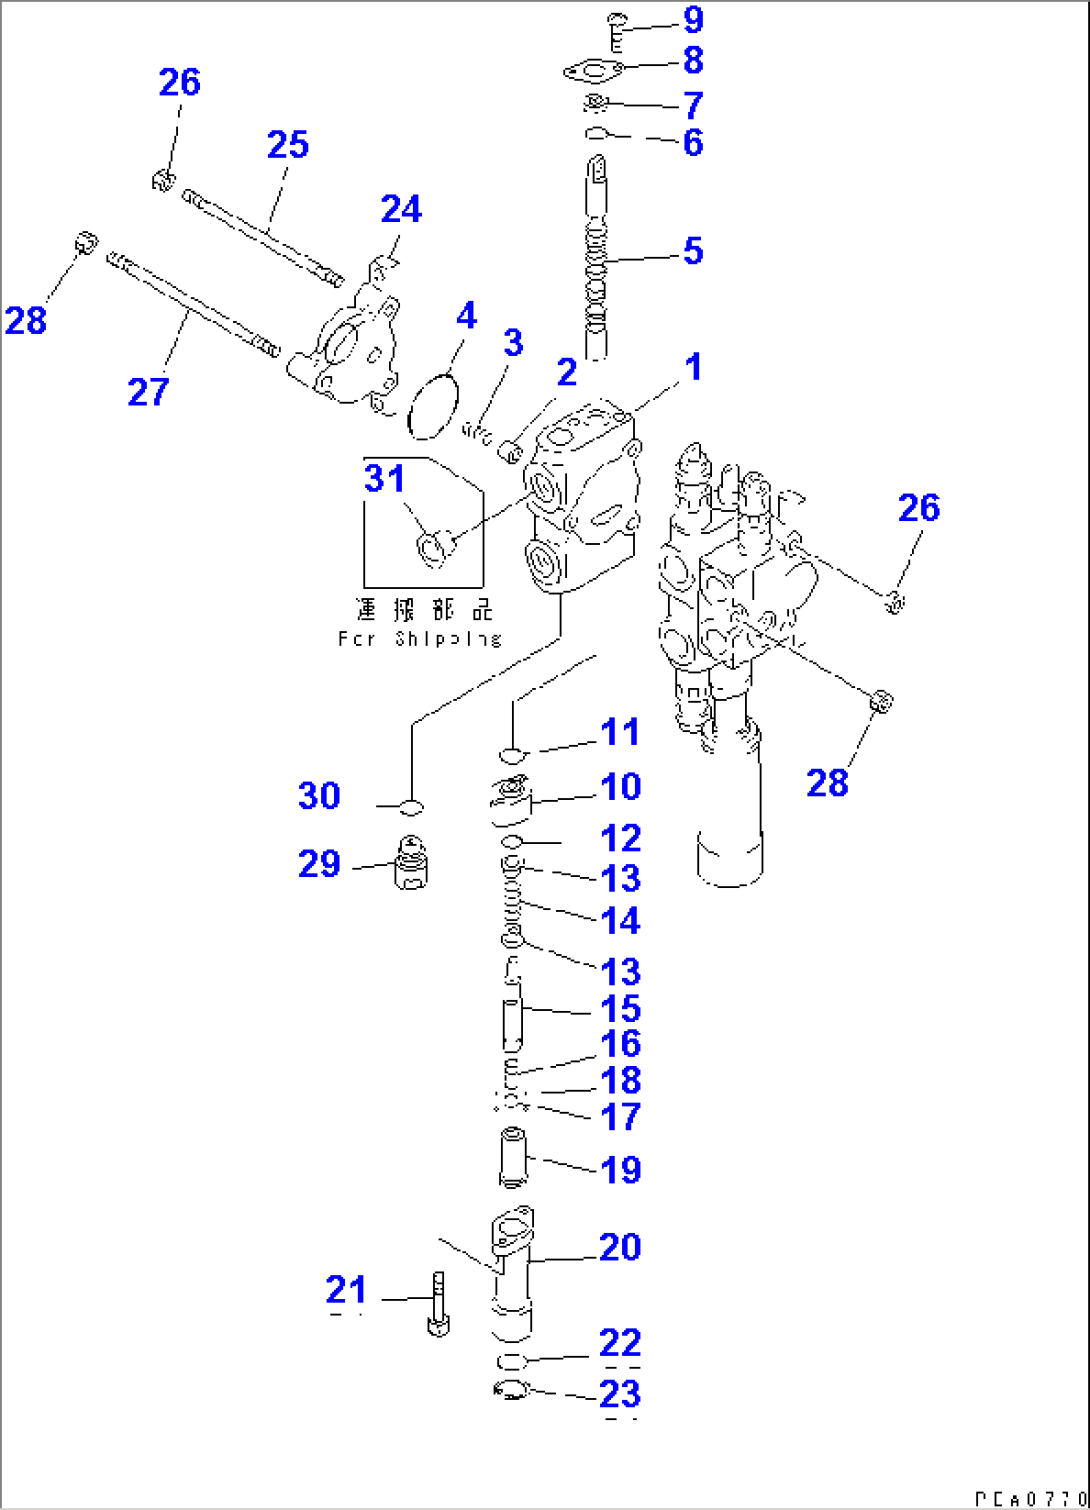 2-SPOOL CONTROL VALVE (2/2) (WITH PRESSURE PICK-UP LINE)